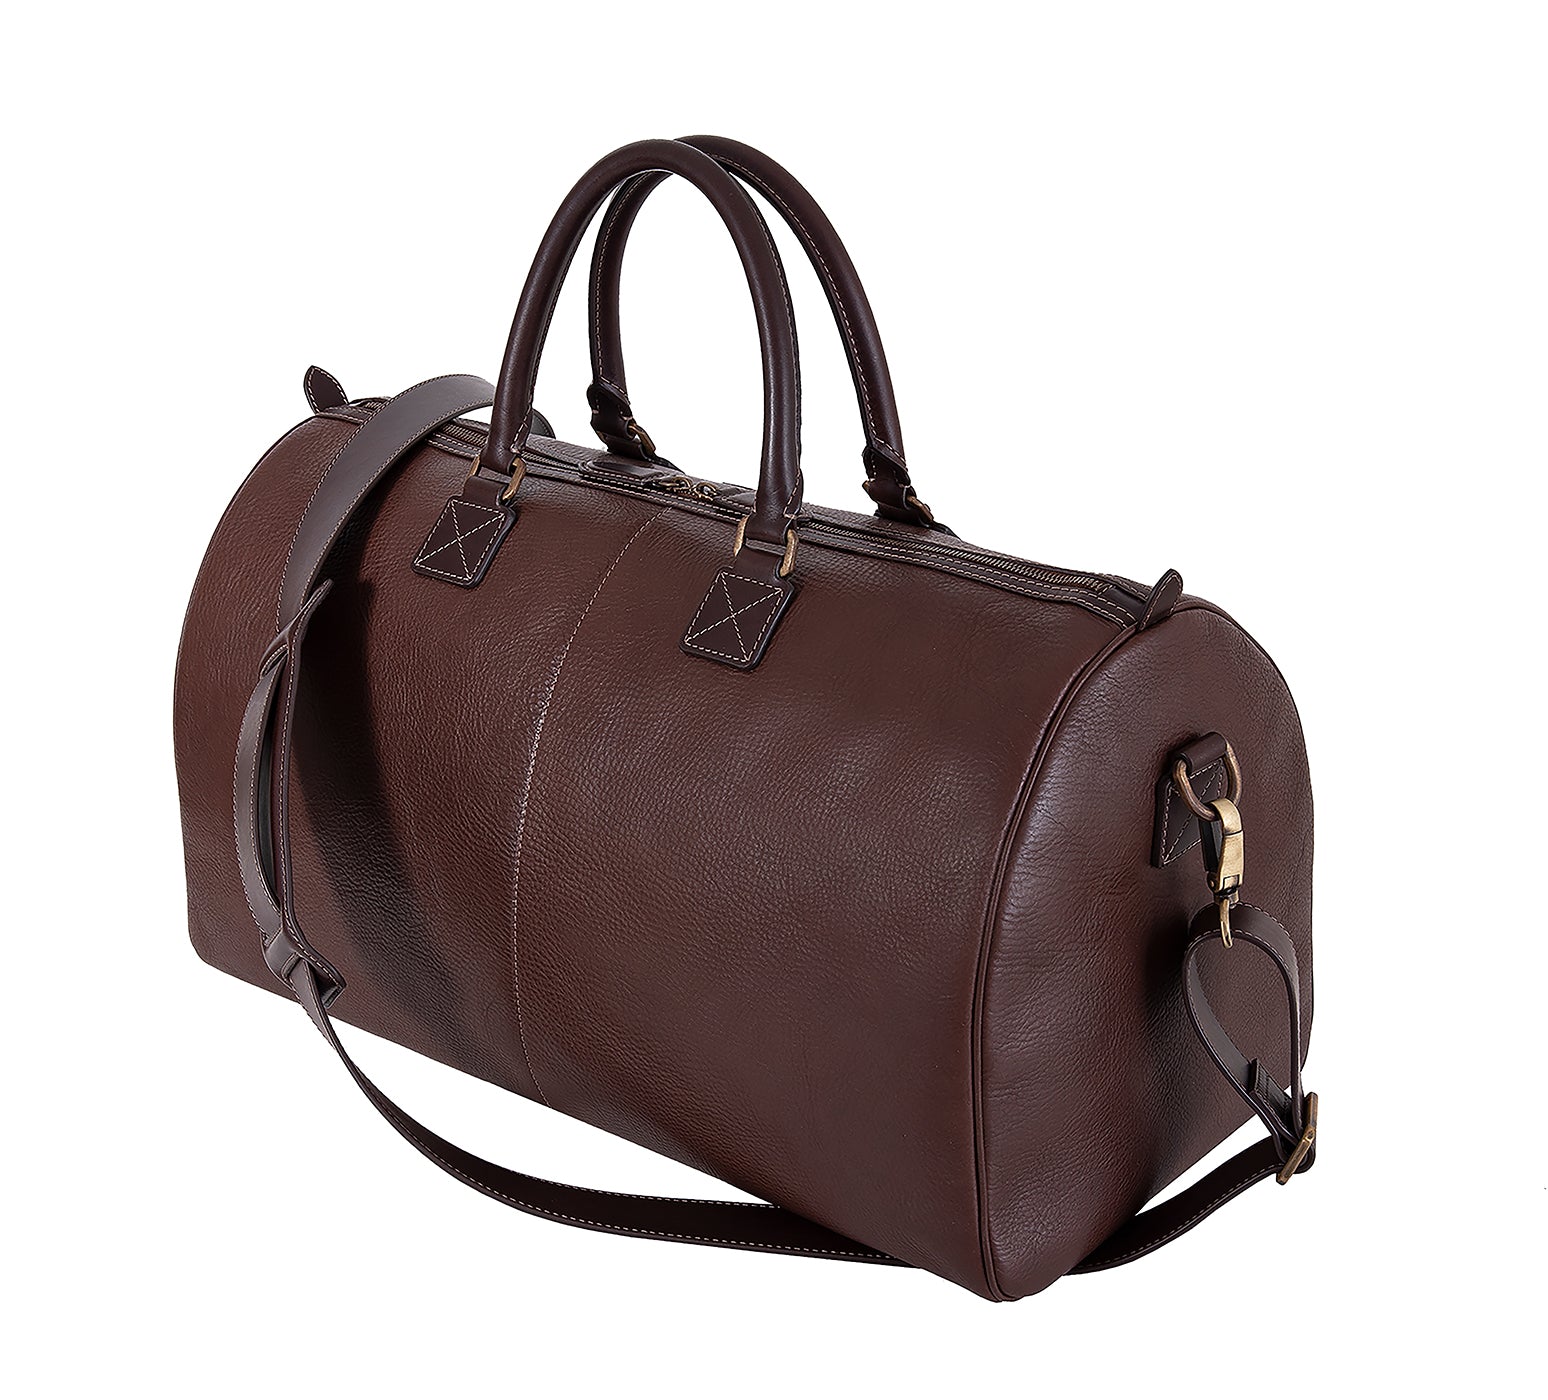 The Portland Mens Leather Travel Bag from Rydal in 'Dark Brown' showing side of bag.